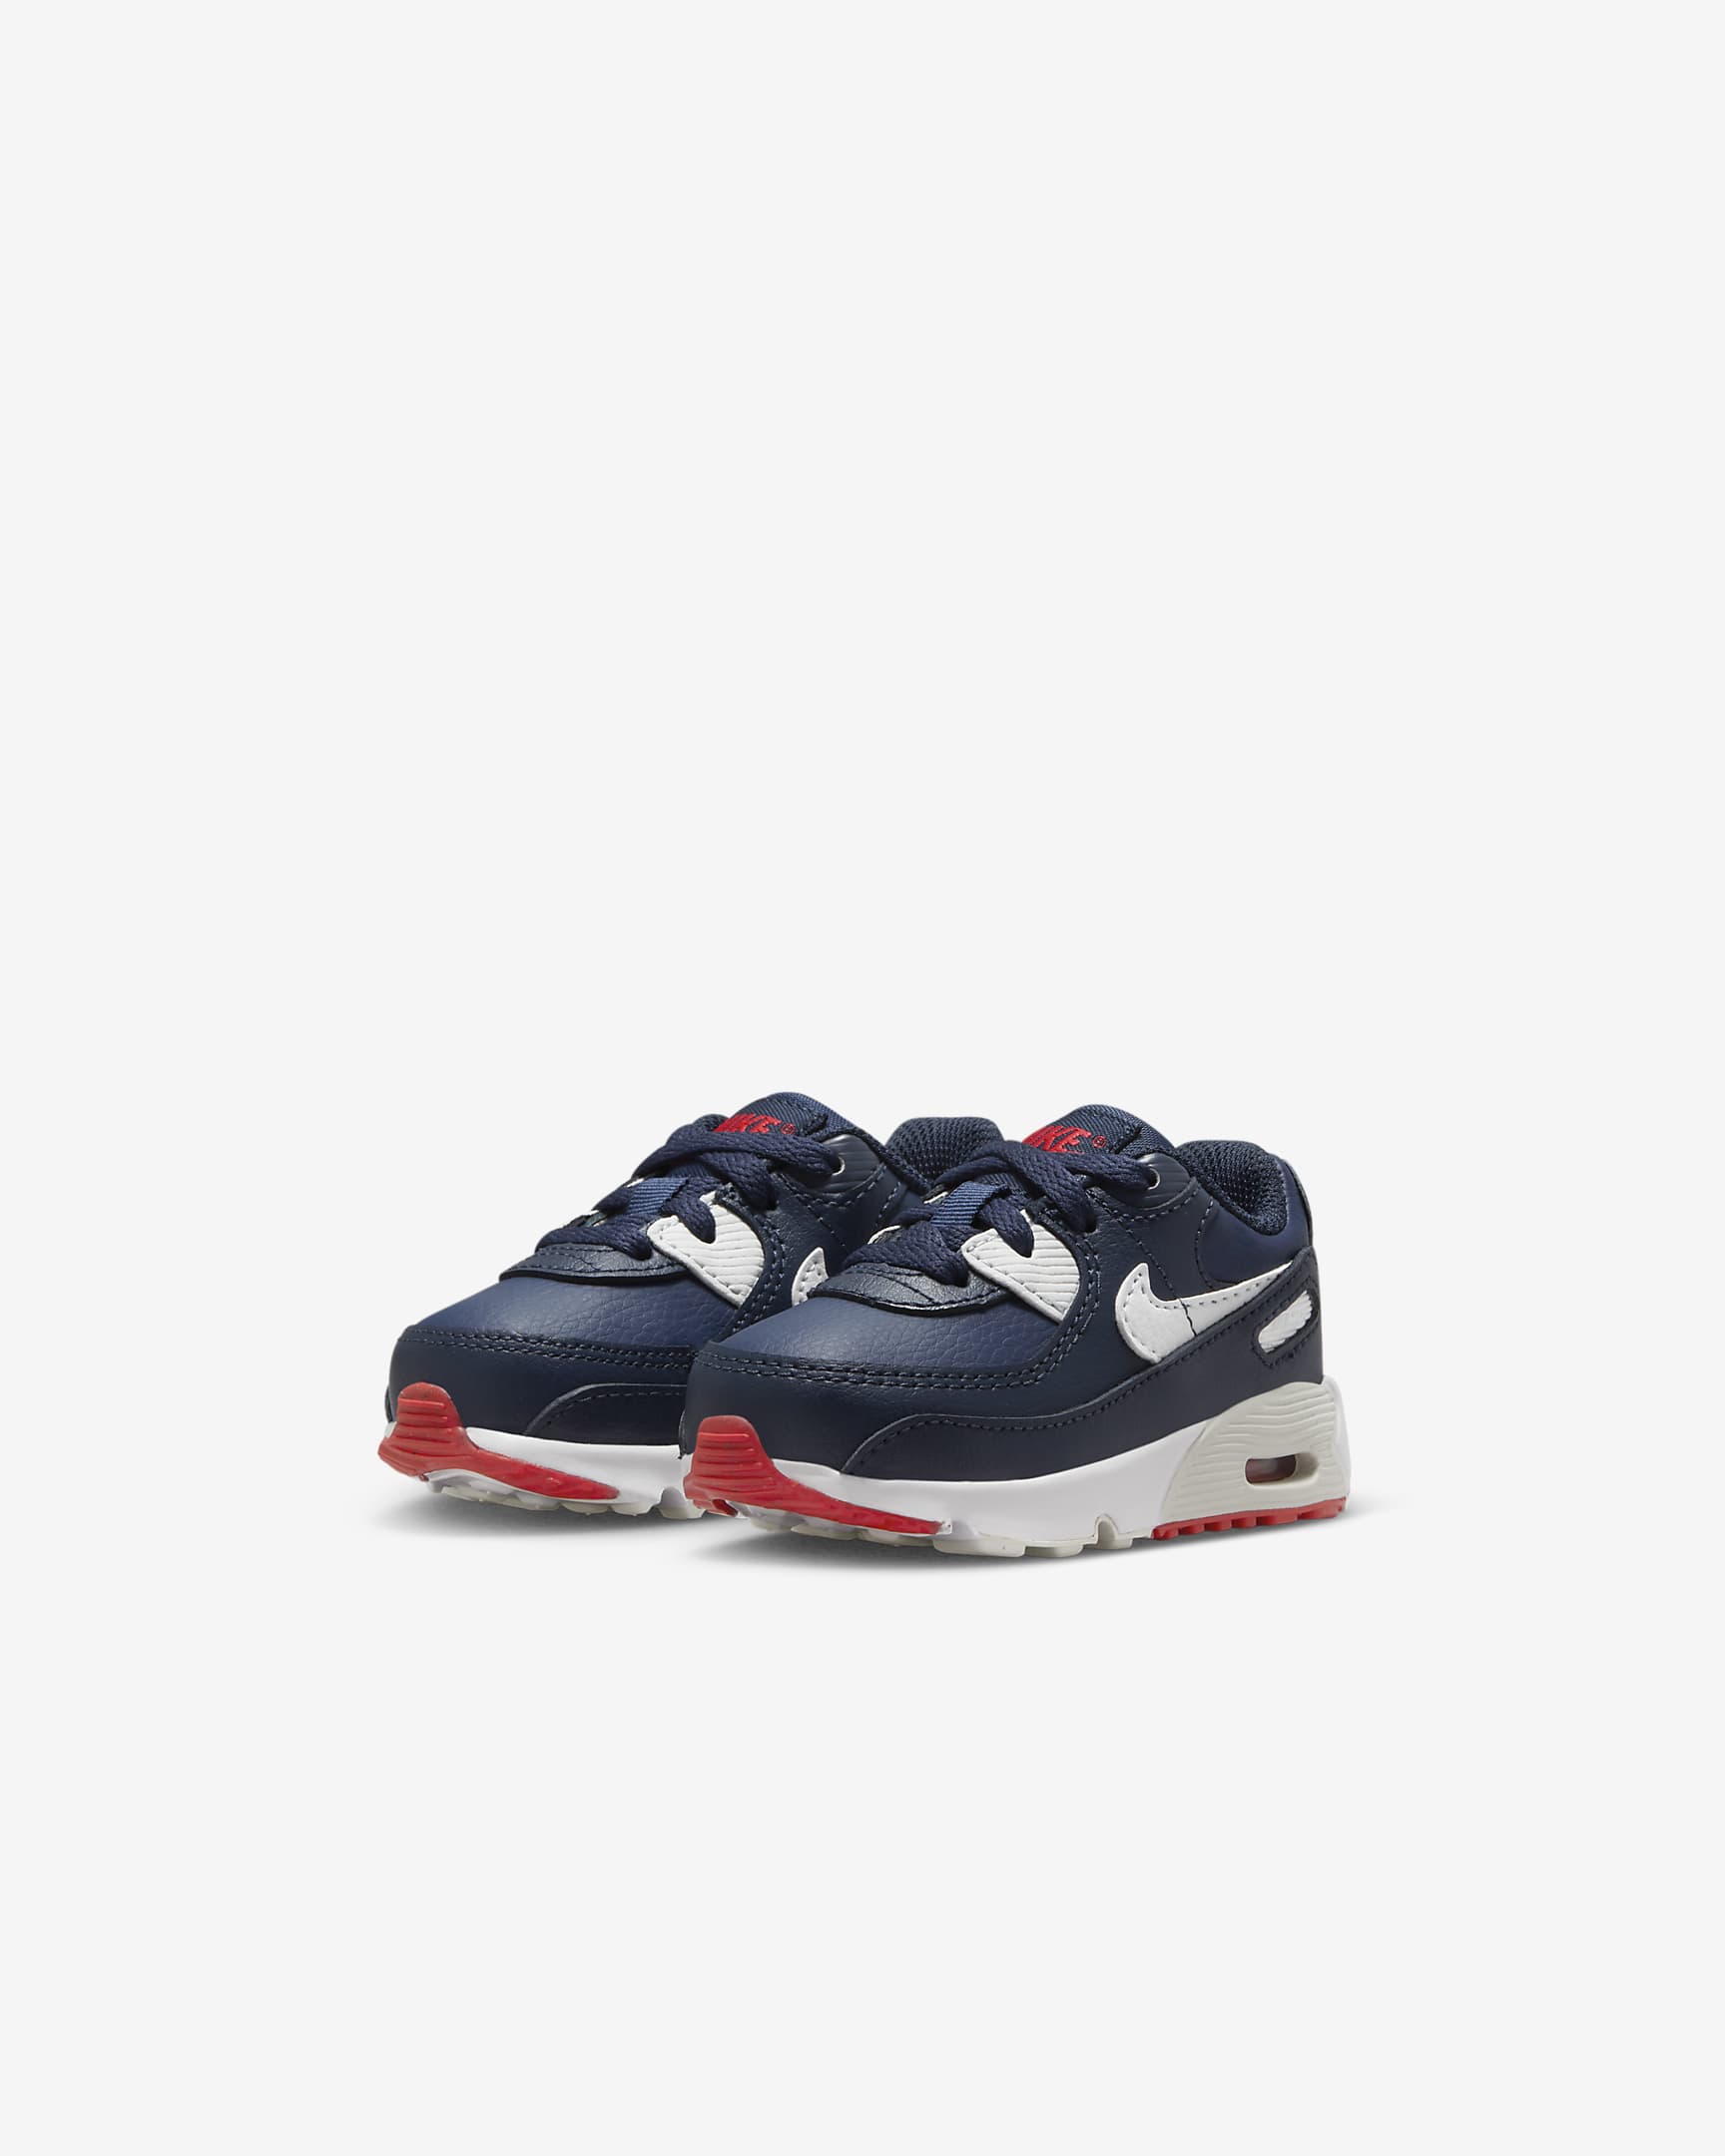 Nike Air Max 90 LTR Baby/Toddler Shoes - Obsidian/Midnight Navy/Track Red/White